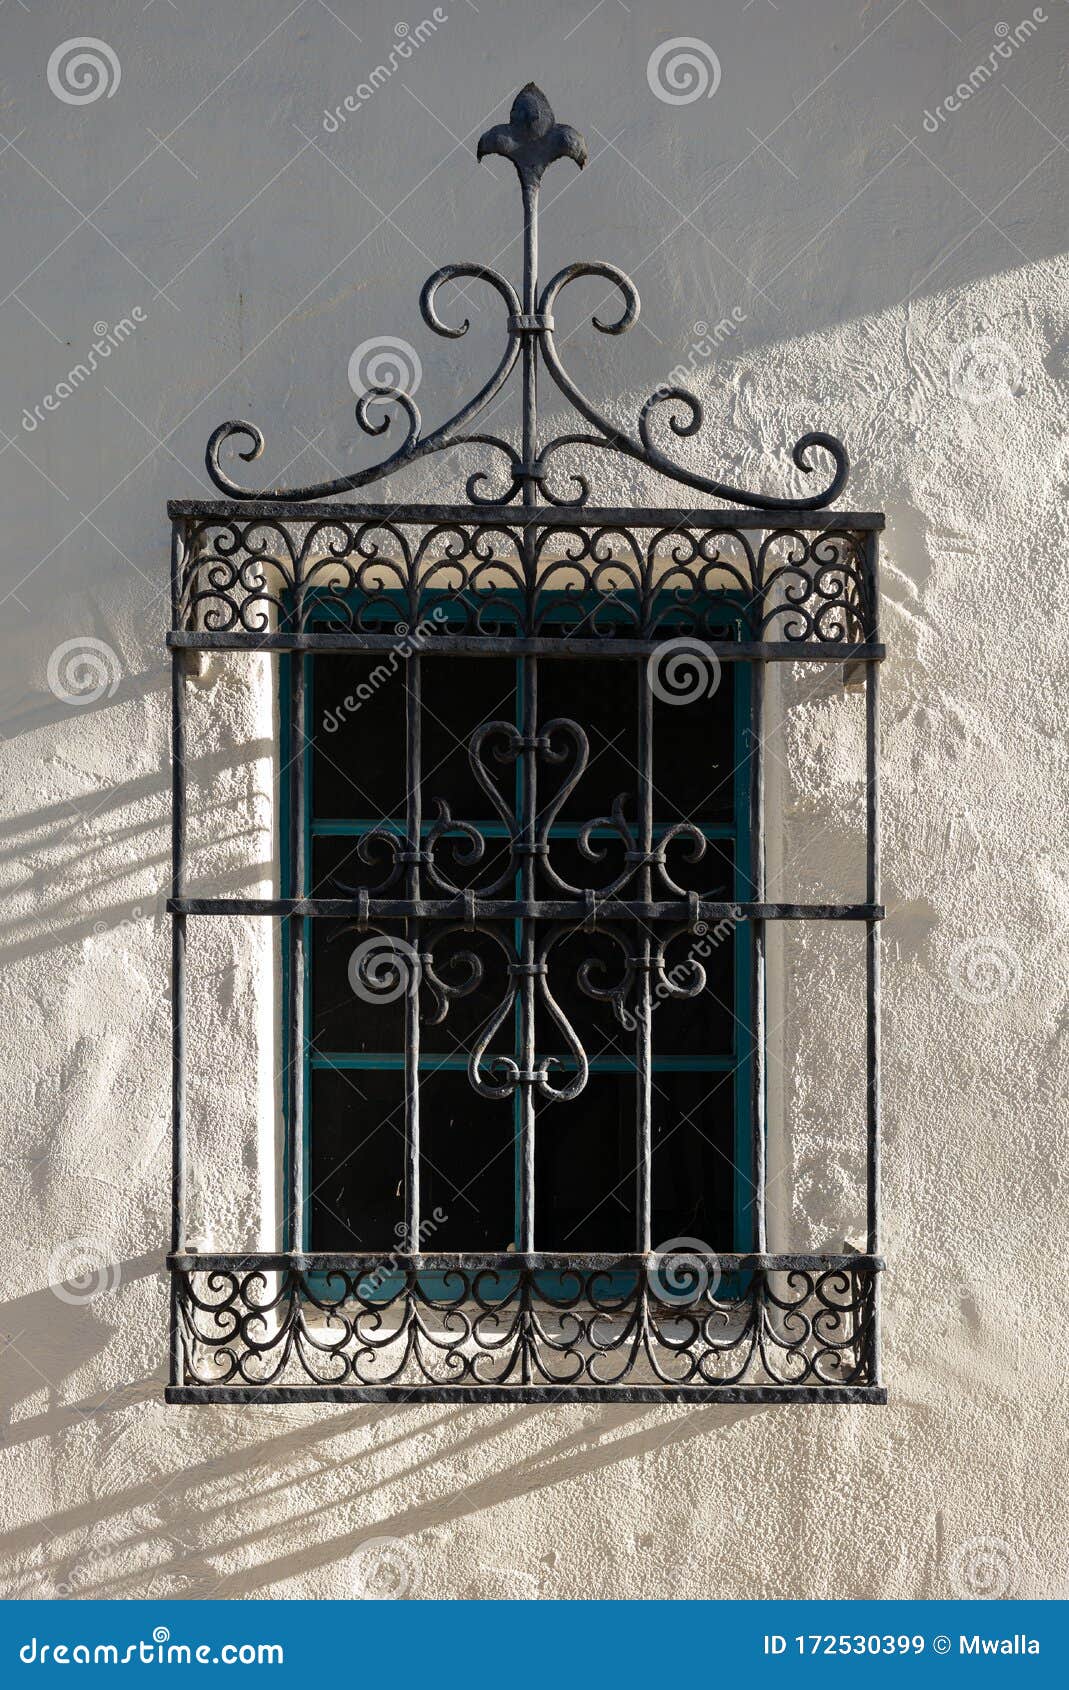 sso16 Wrought Iron Spanish belly Window Grill 